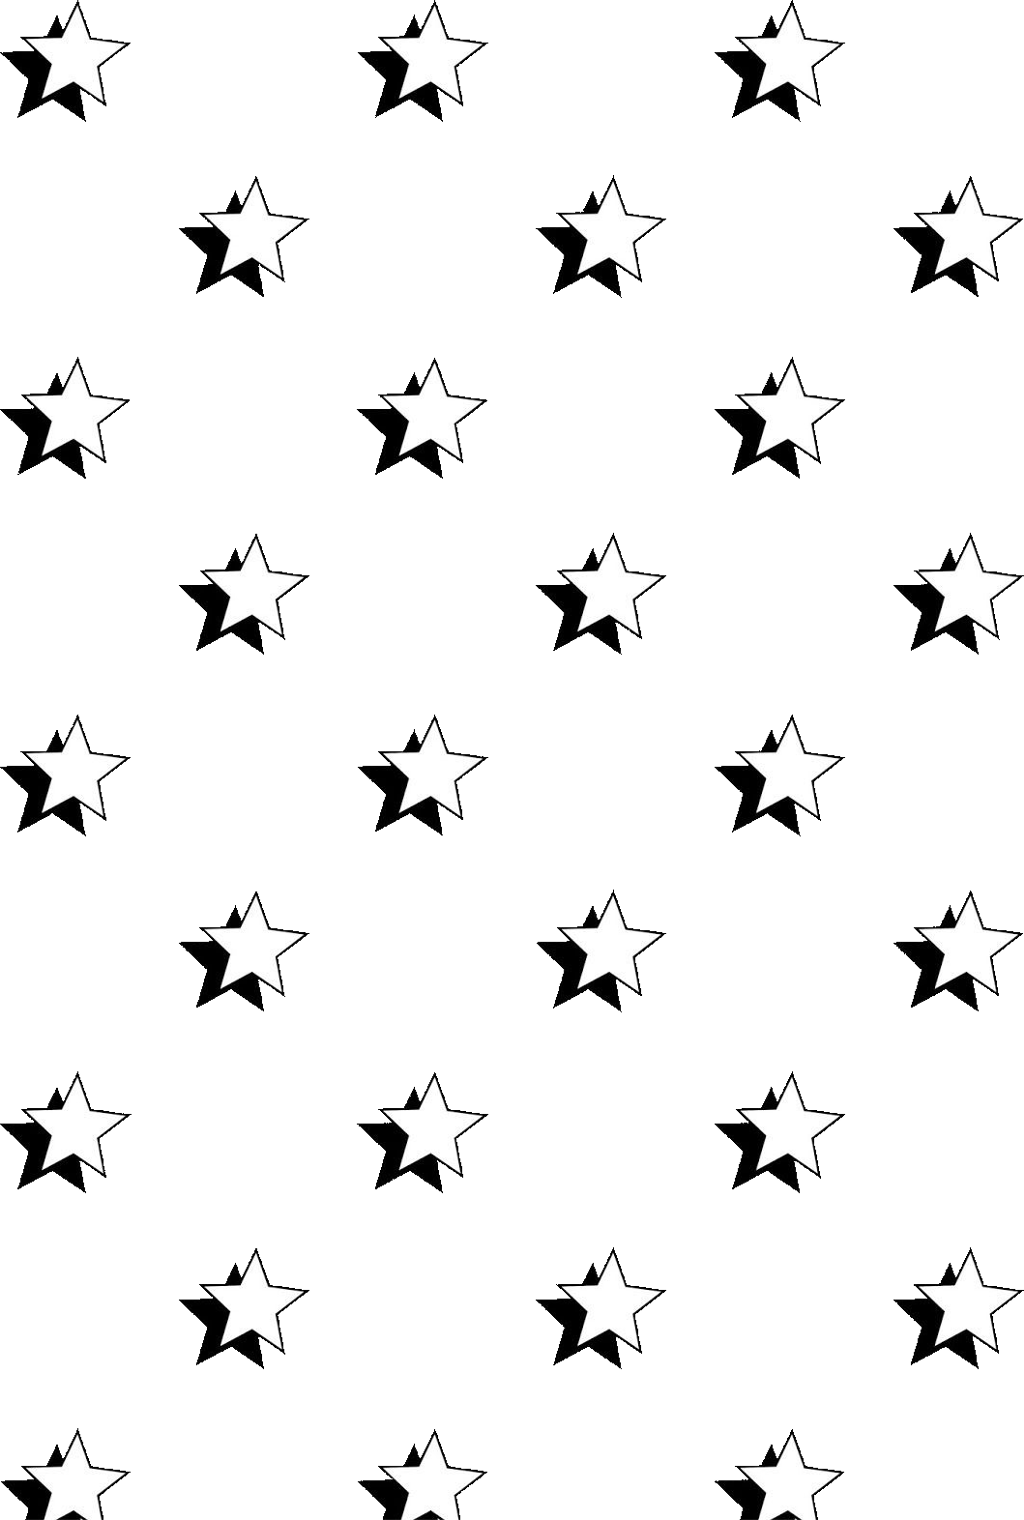 A Black And White Background With White Stars